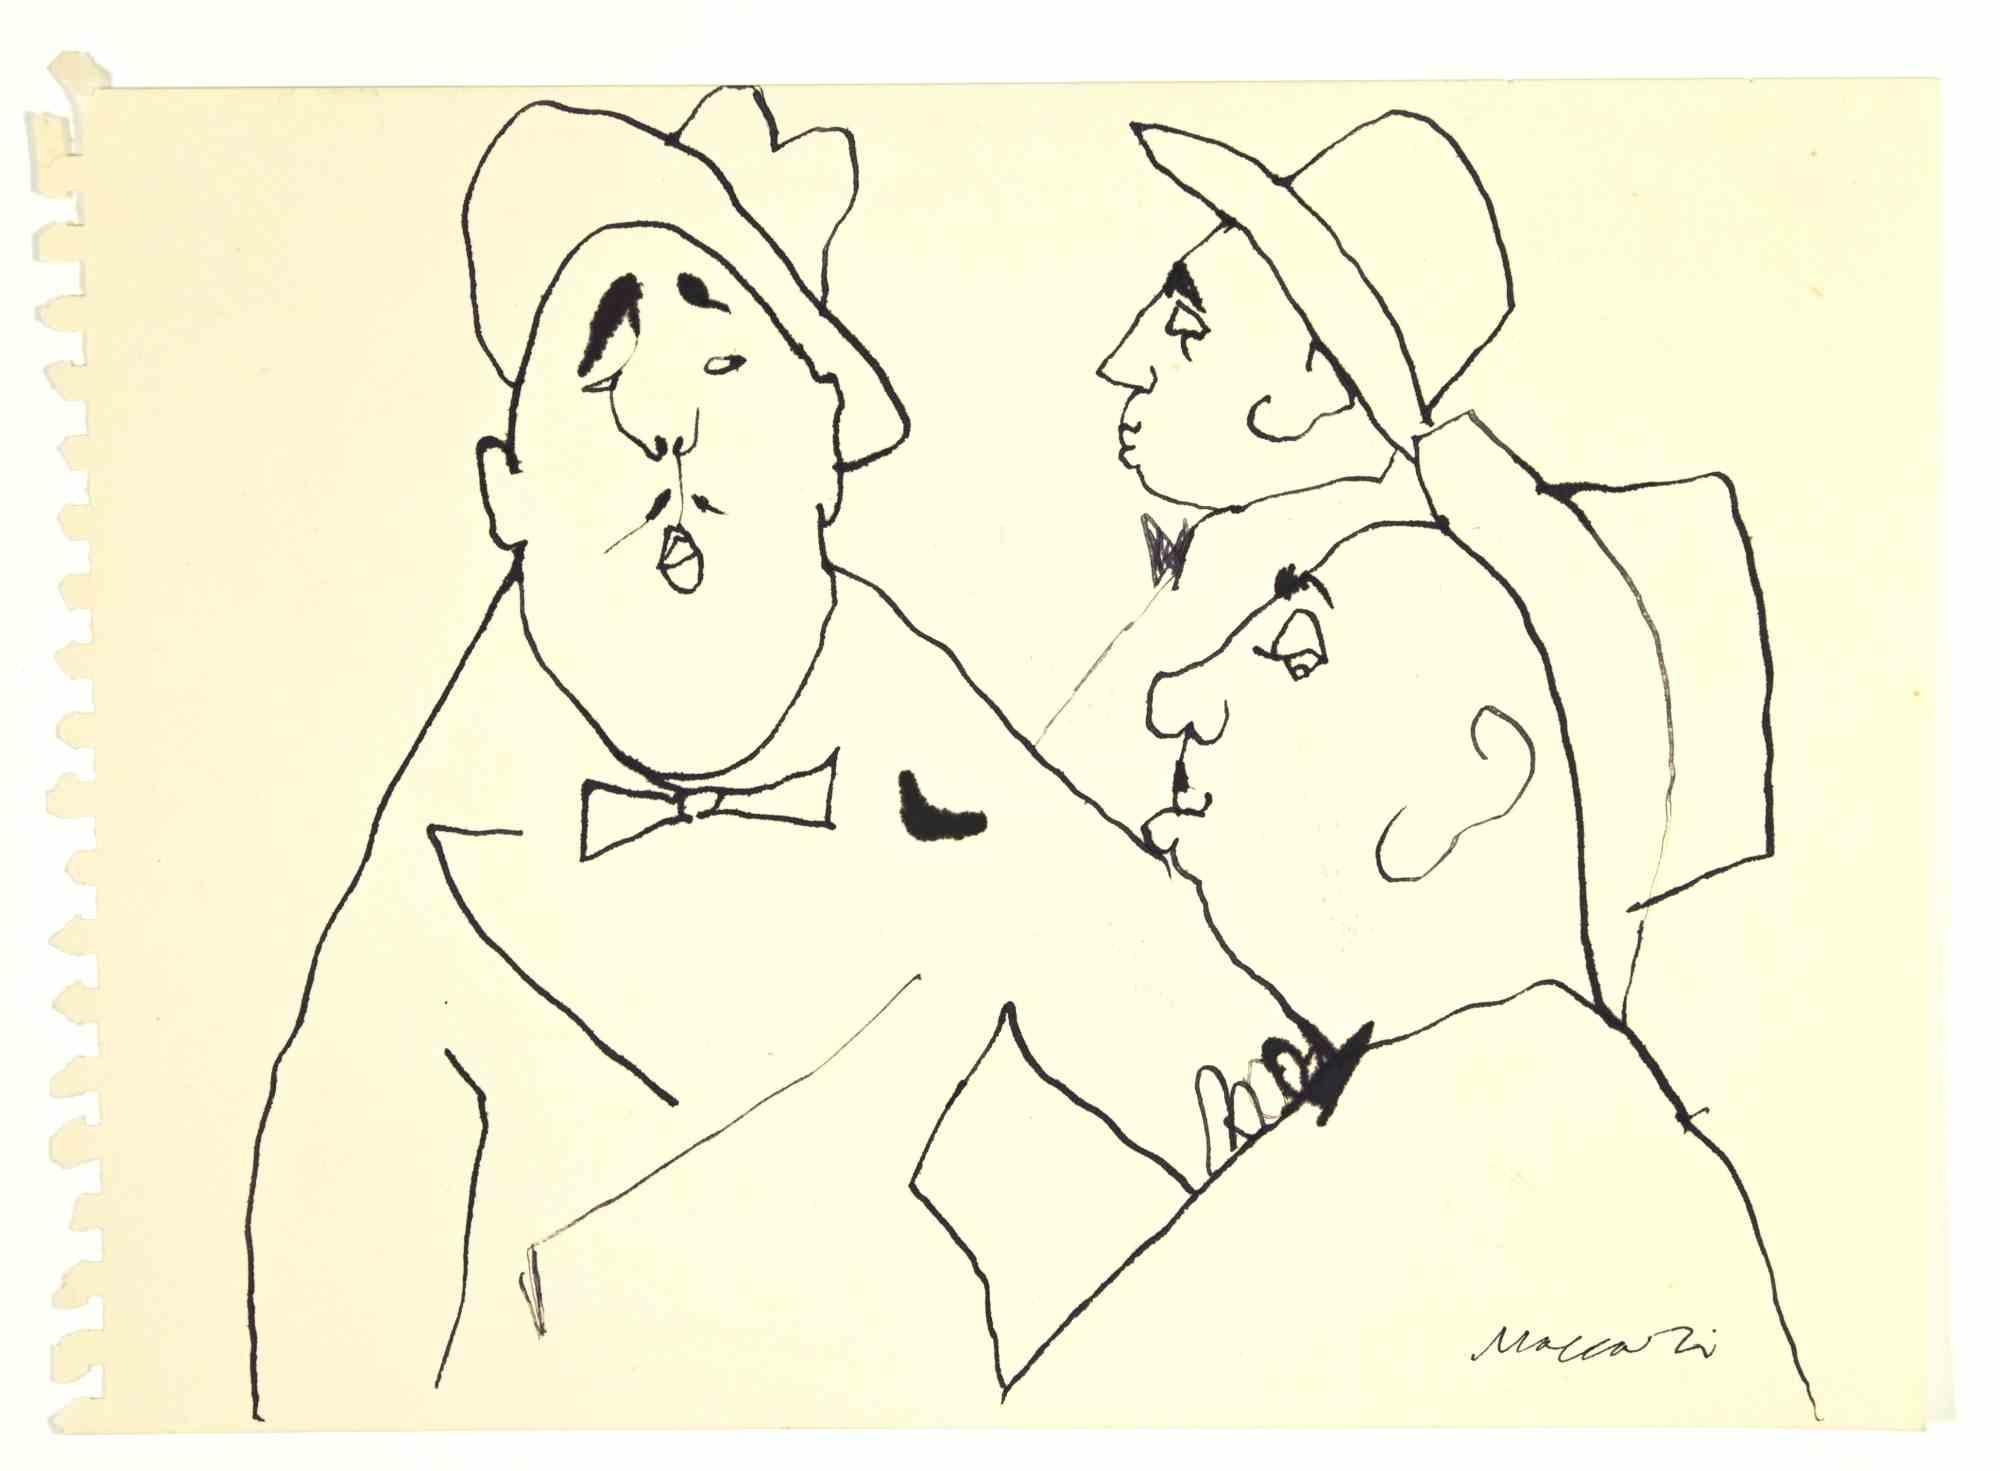 Figures with Hat is a China Ink Drawing realized by Mino Maccari  (1924-1989) in the 1960s.

Hand-signed on the lower.

Good condition.

Mino Maccari (Siena, 1924-Rome, June 16, 1989) was an Italian writer, painter, engraver and journalist, winner